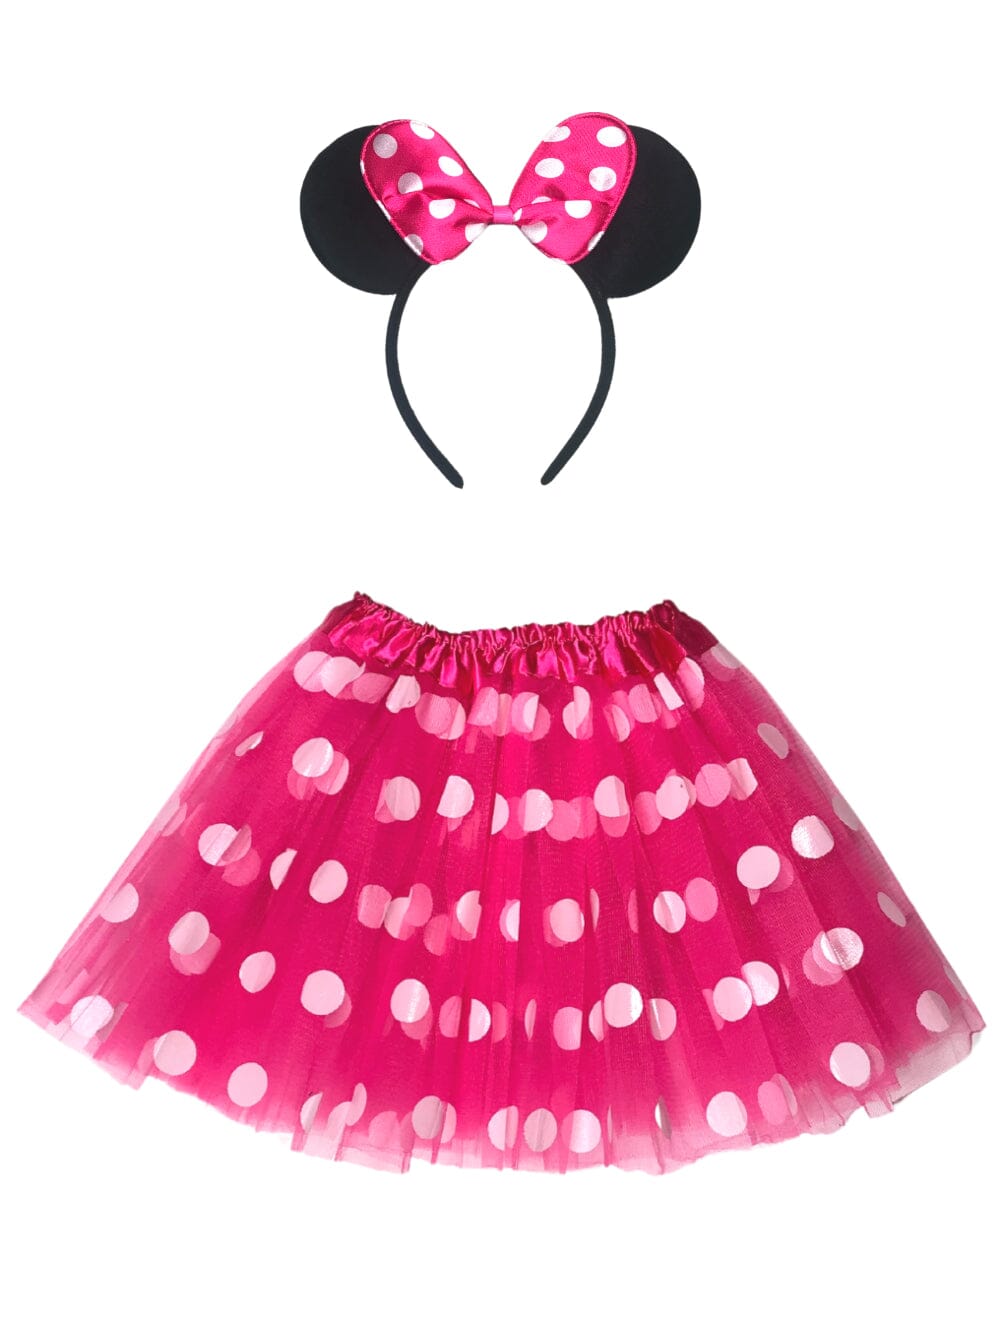 Adult Minnie Mouse Costume - Neon Pink Polka Dot Tutu Skirt & Headband Set for Adult or Plus Size - Sydney So Sweet